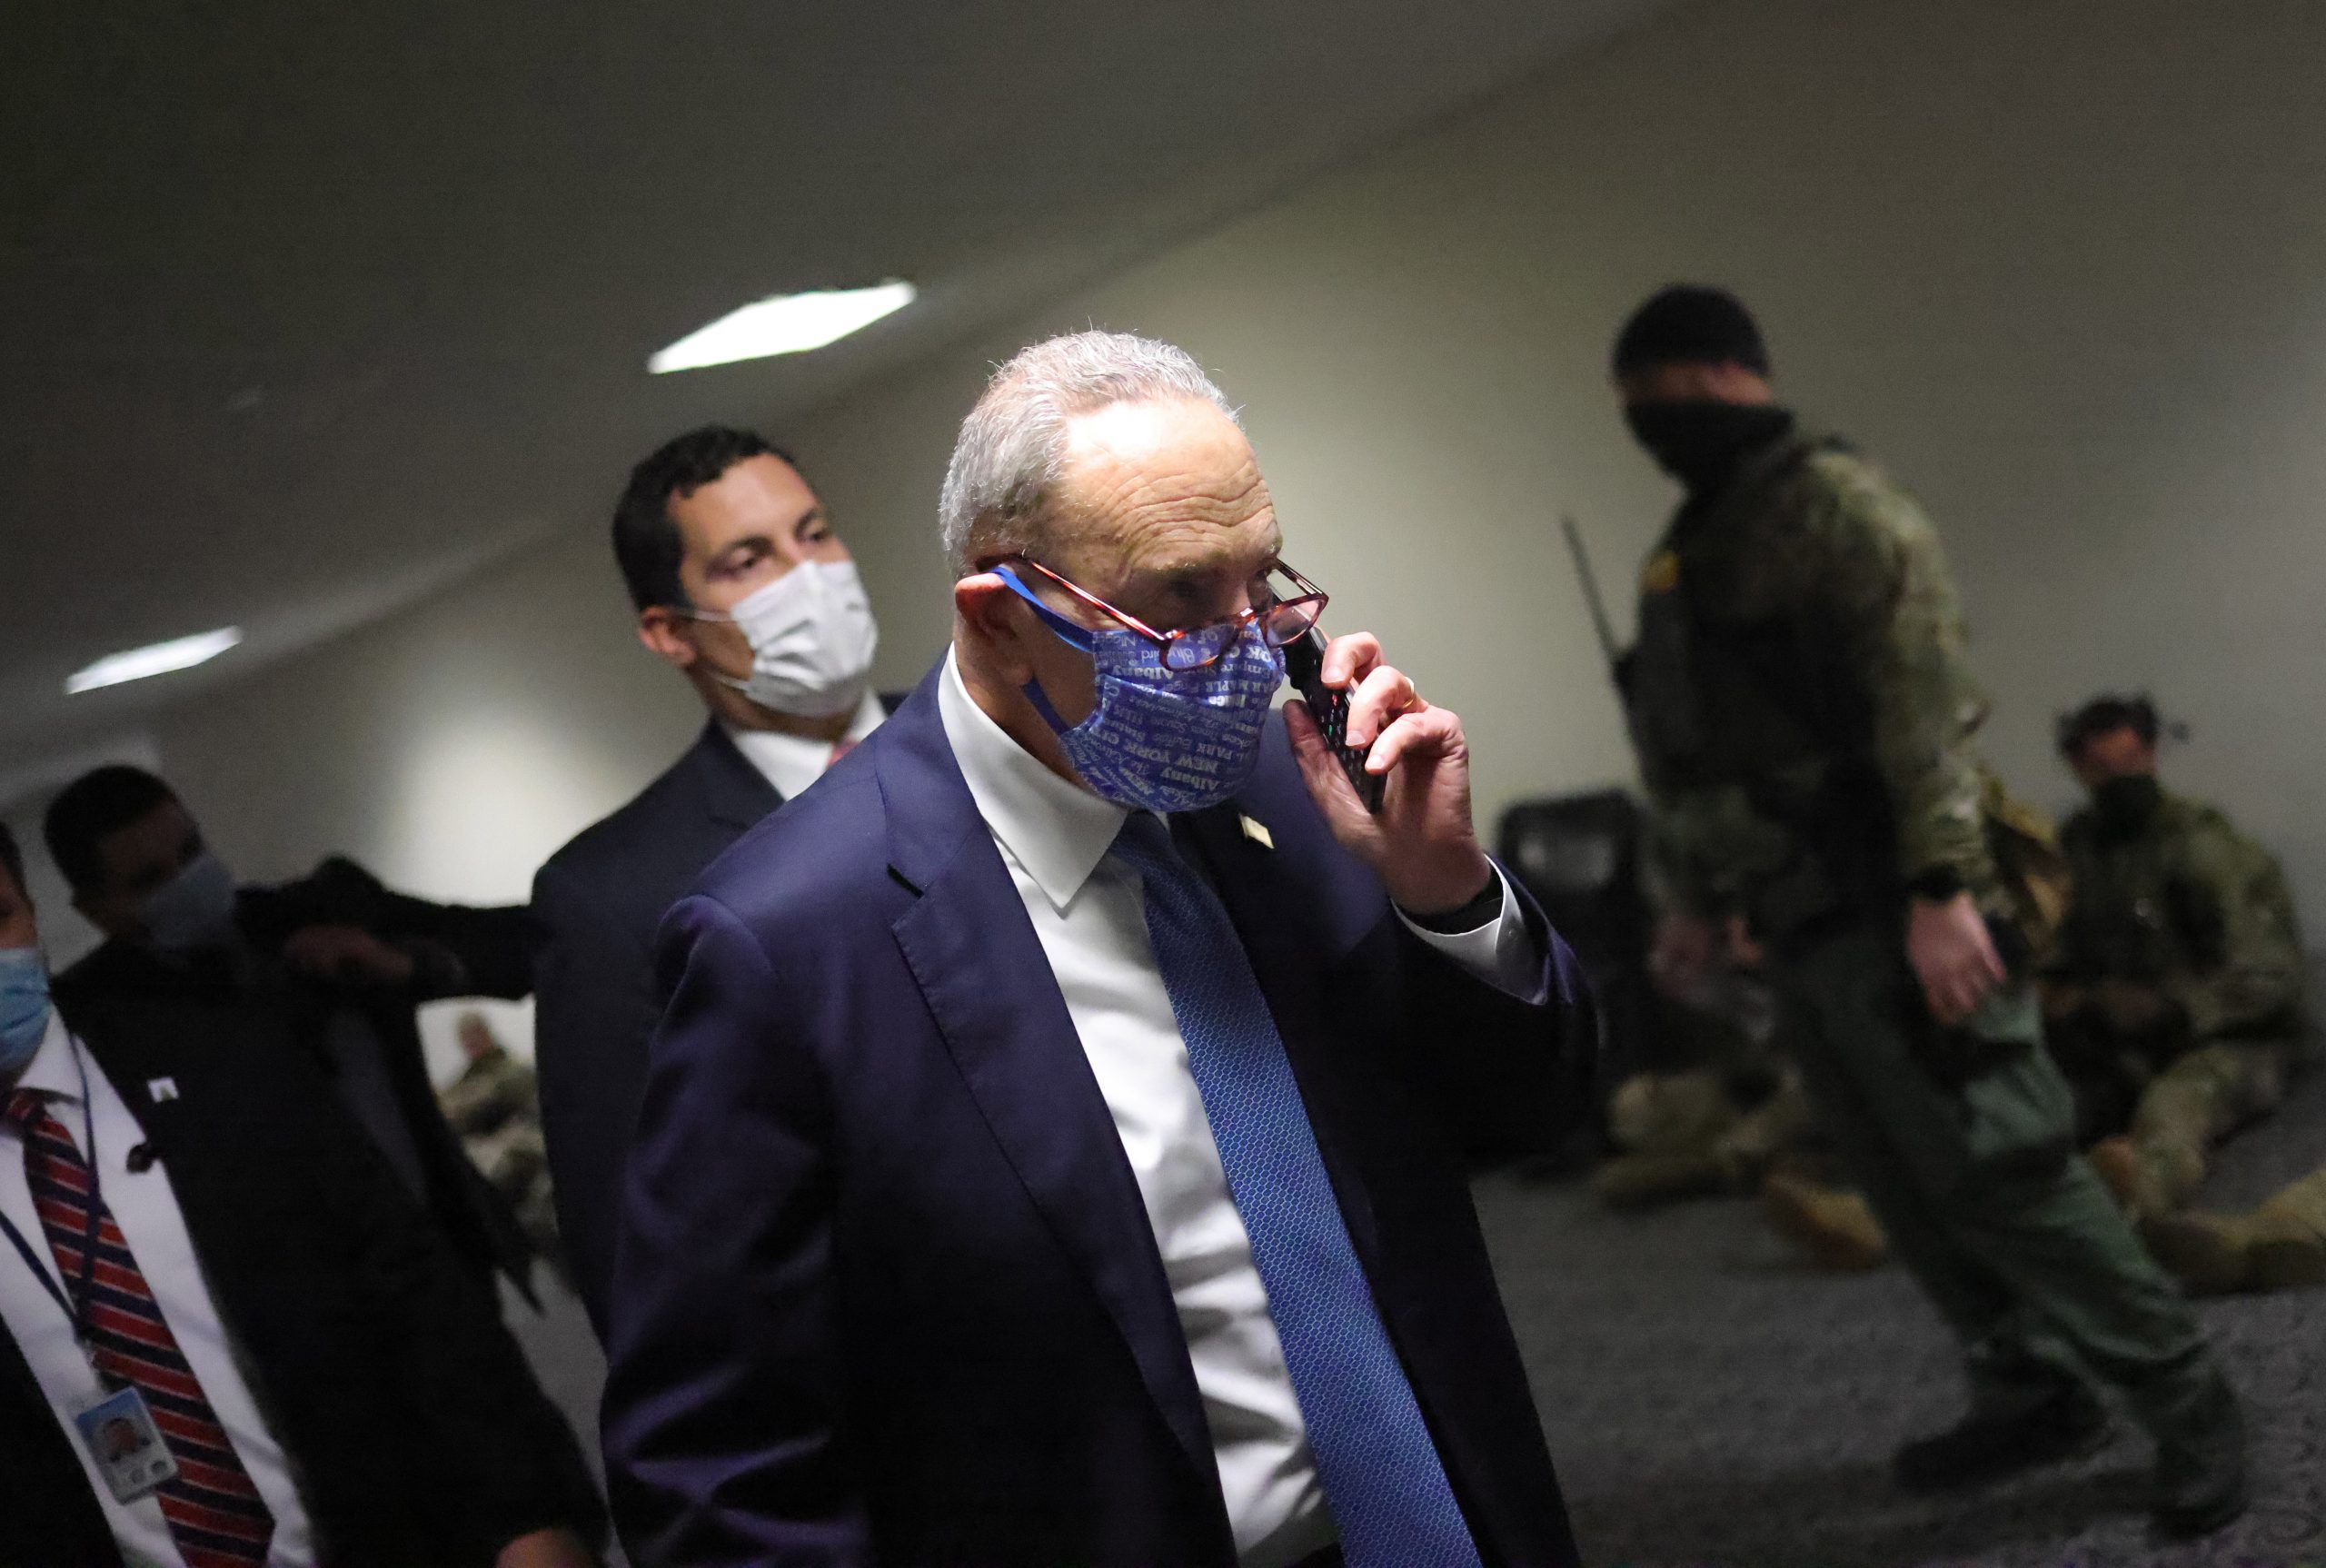 epa08923779 Senate Minority Leader Chuck Schumer (D-NY) walks to a room on Capitol Hill, in Washington, DC, USA, 06 January 2021. Various groups of Trump supporters have broken into the US Capitol and rioted as Congress prepares to meet and certify the results of the 2020 US Presidential election.  EPA/Win McNamee / POOL